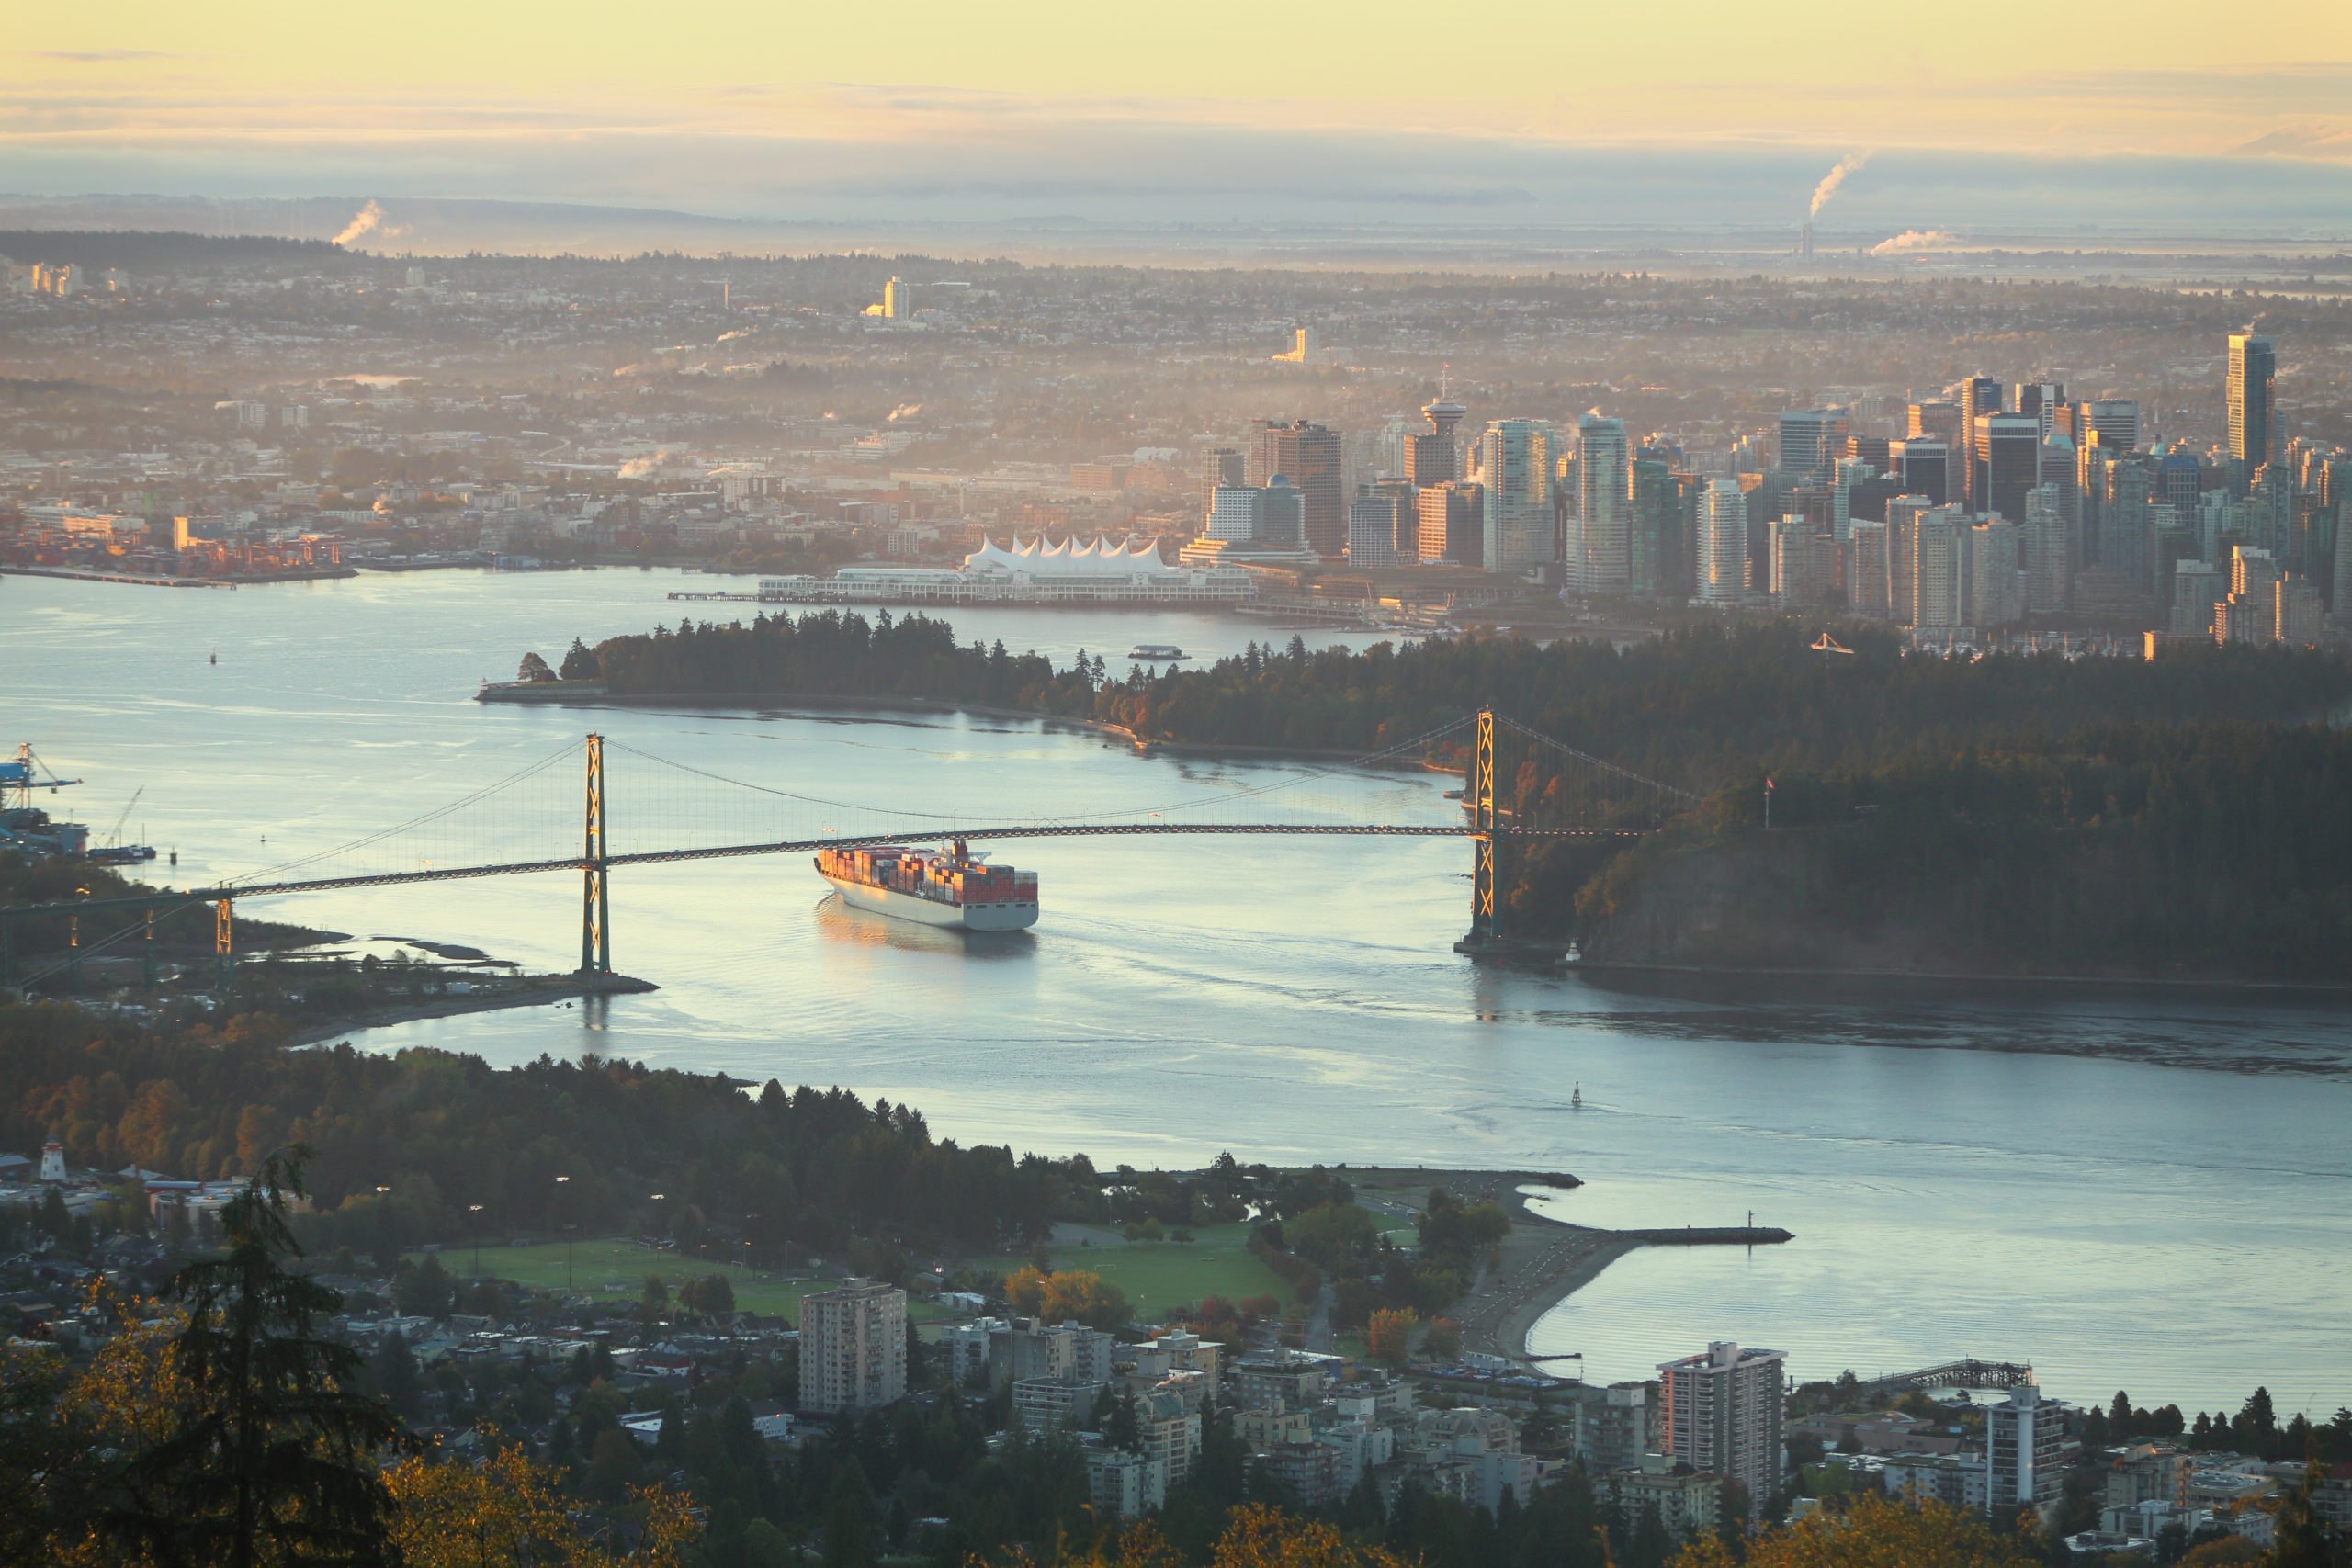 Vancouver skyline / Getty Images